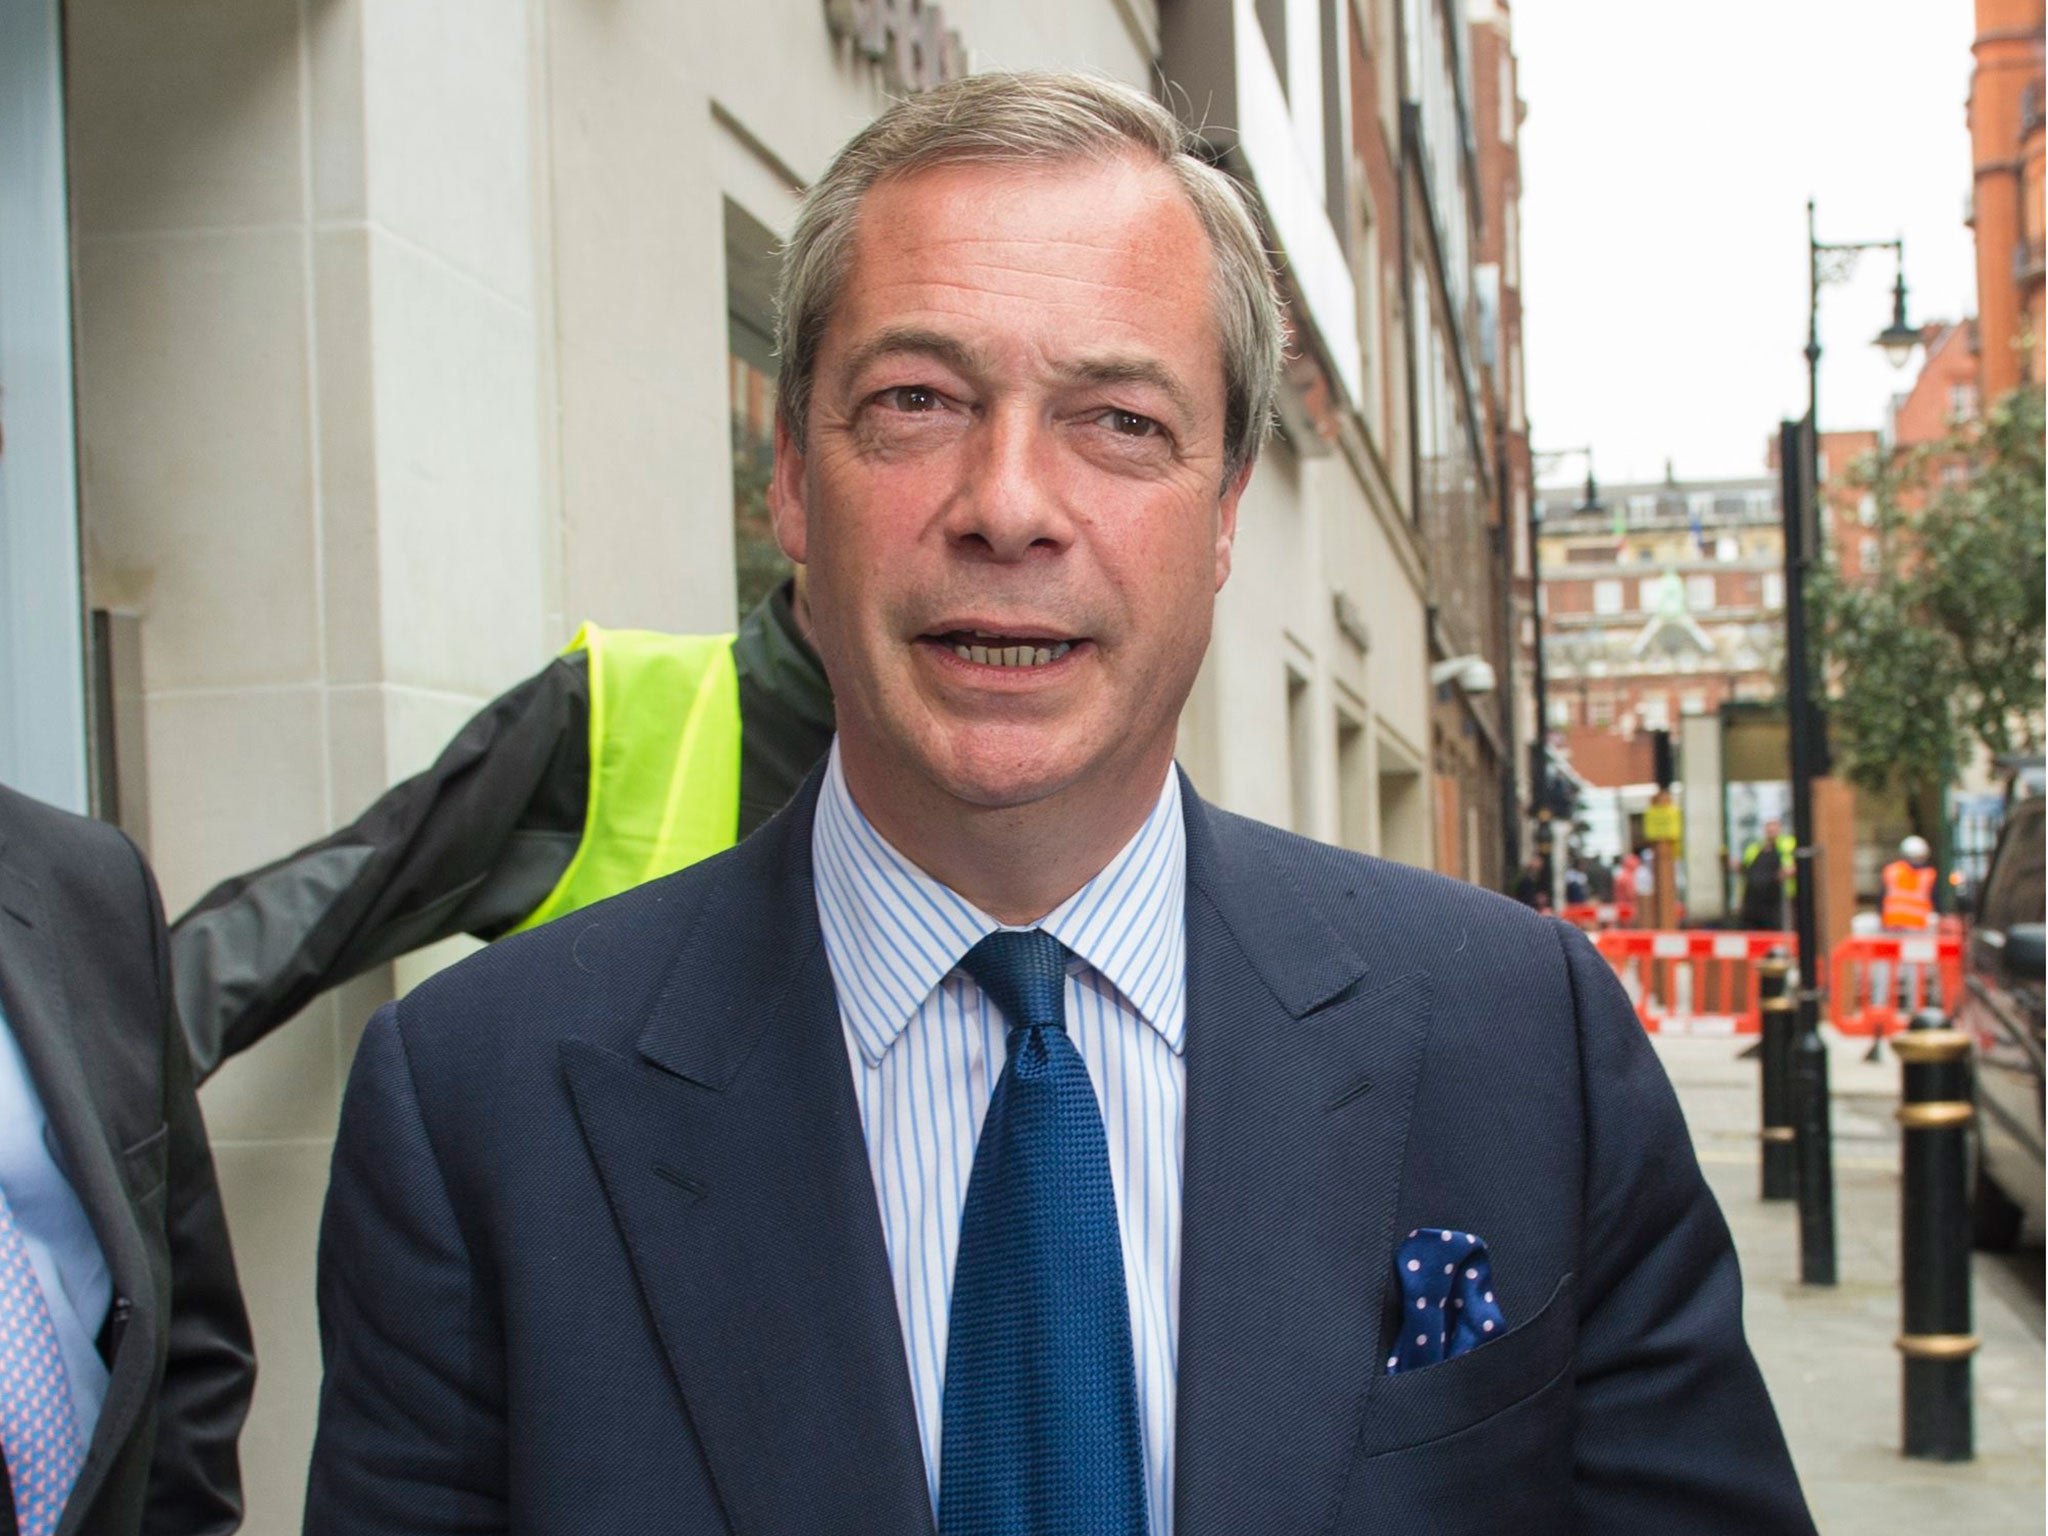 Nigel Farage has come under renewed pressure to take a break from the leadership of Ukip, with the party still looking in danger of tearing itself apart after a disappointing general election